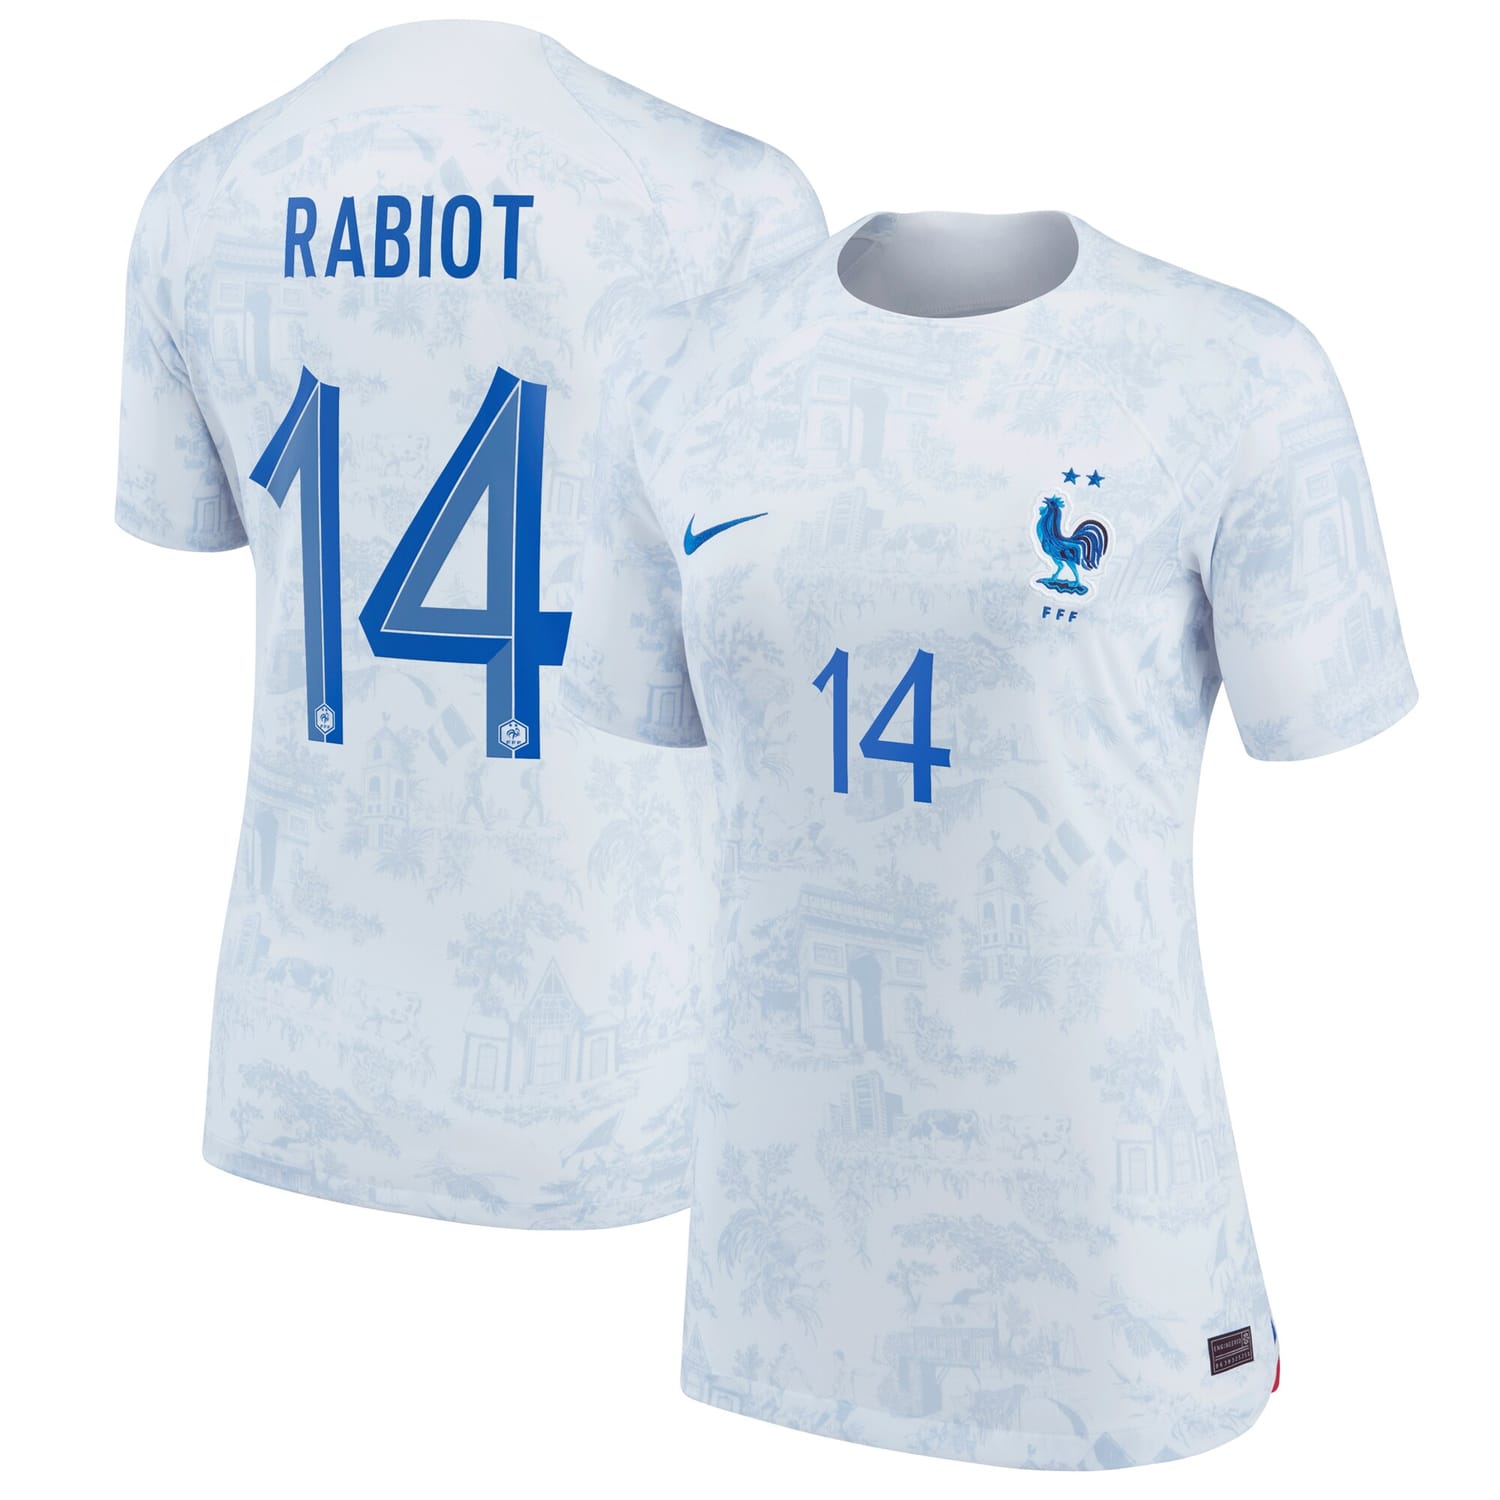 France National Team Away Jersey Shirt 2022 player Adrien Rabiot 14 printing for Women